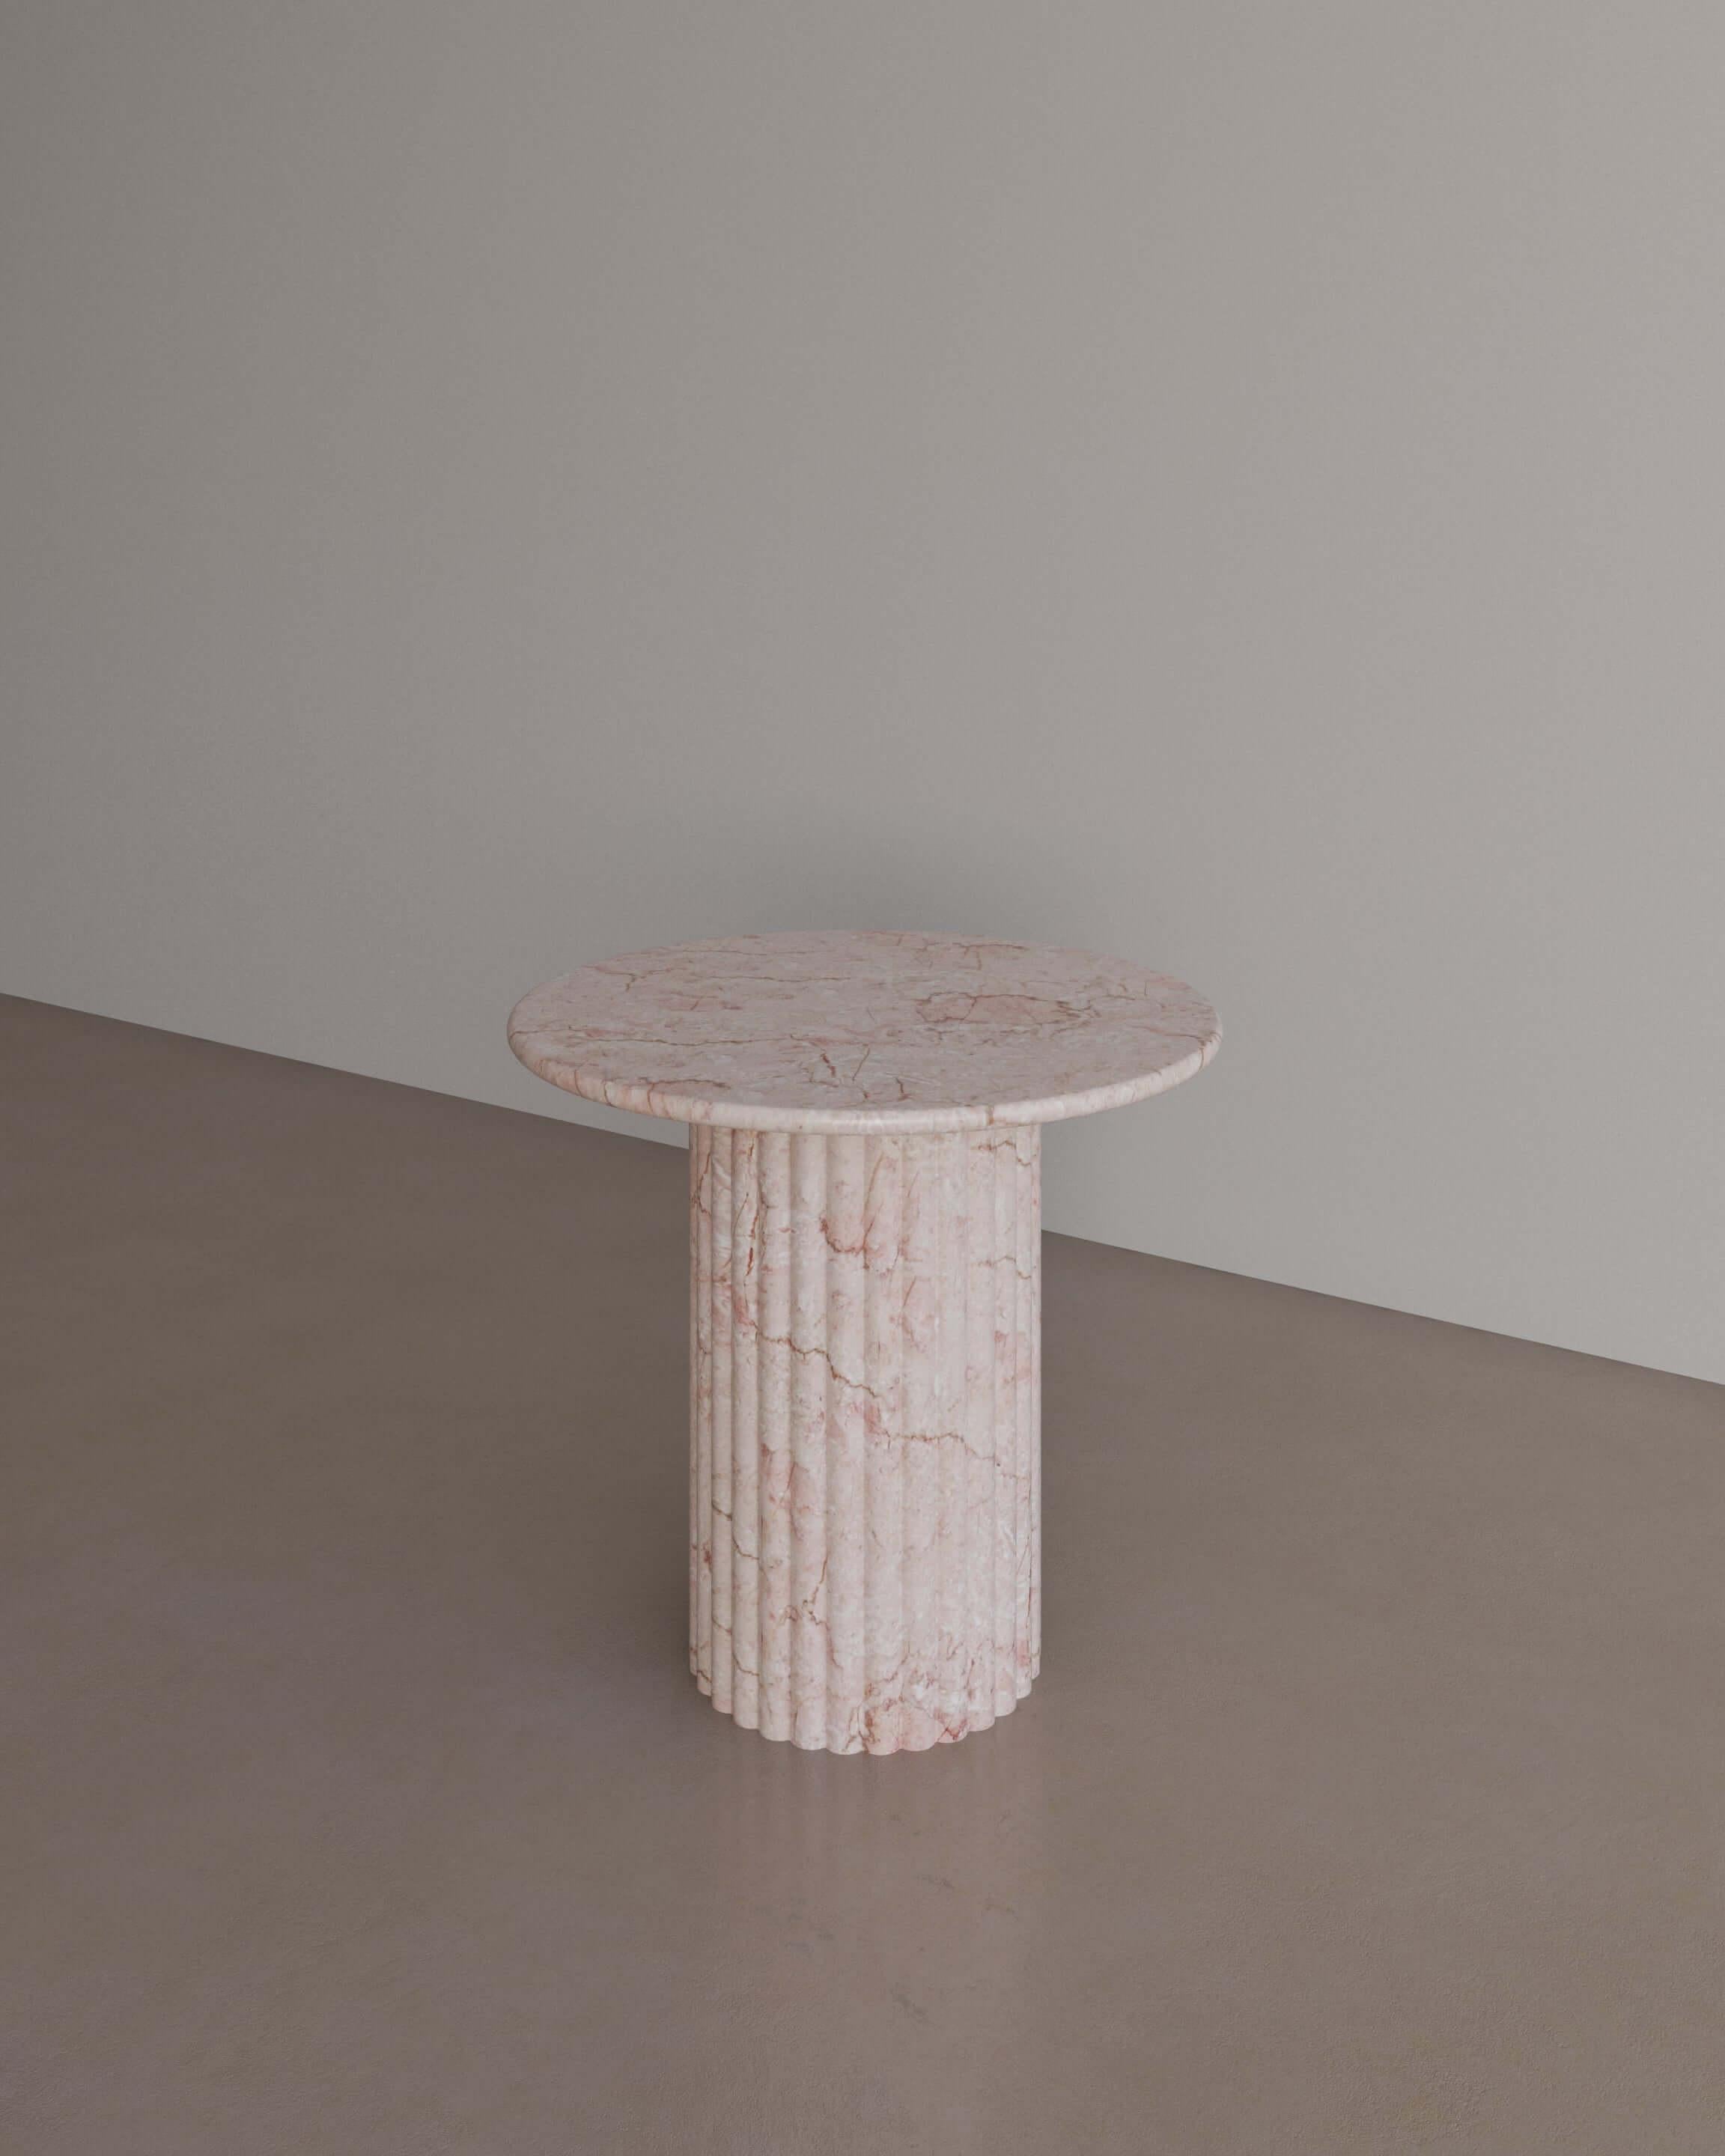 The Antica Occasional table in Afshar Pink Marble by The Essentialist displays a perfect synergy by viewing classical idealism through a modern lens. A traditional pillar supports a circular top with bullnose edges, crafted from whole natural